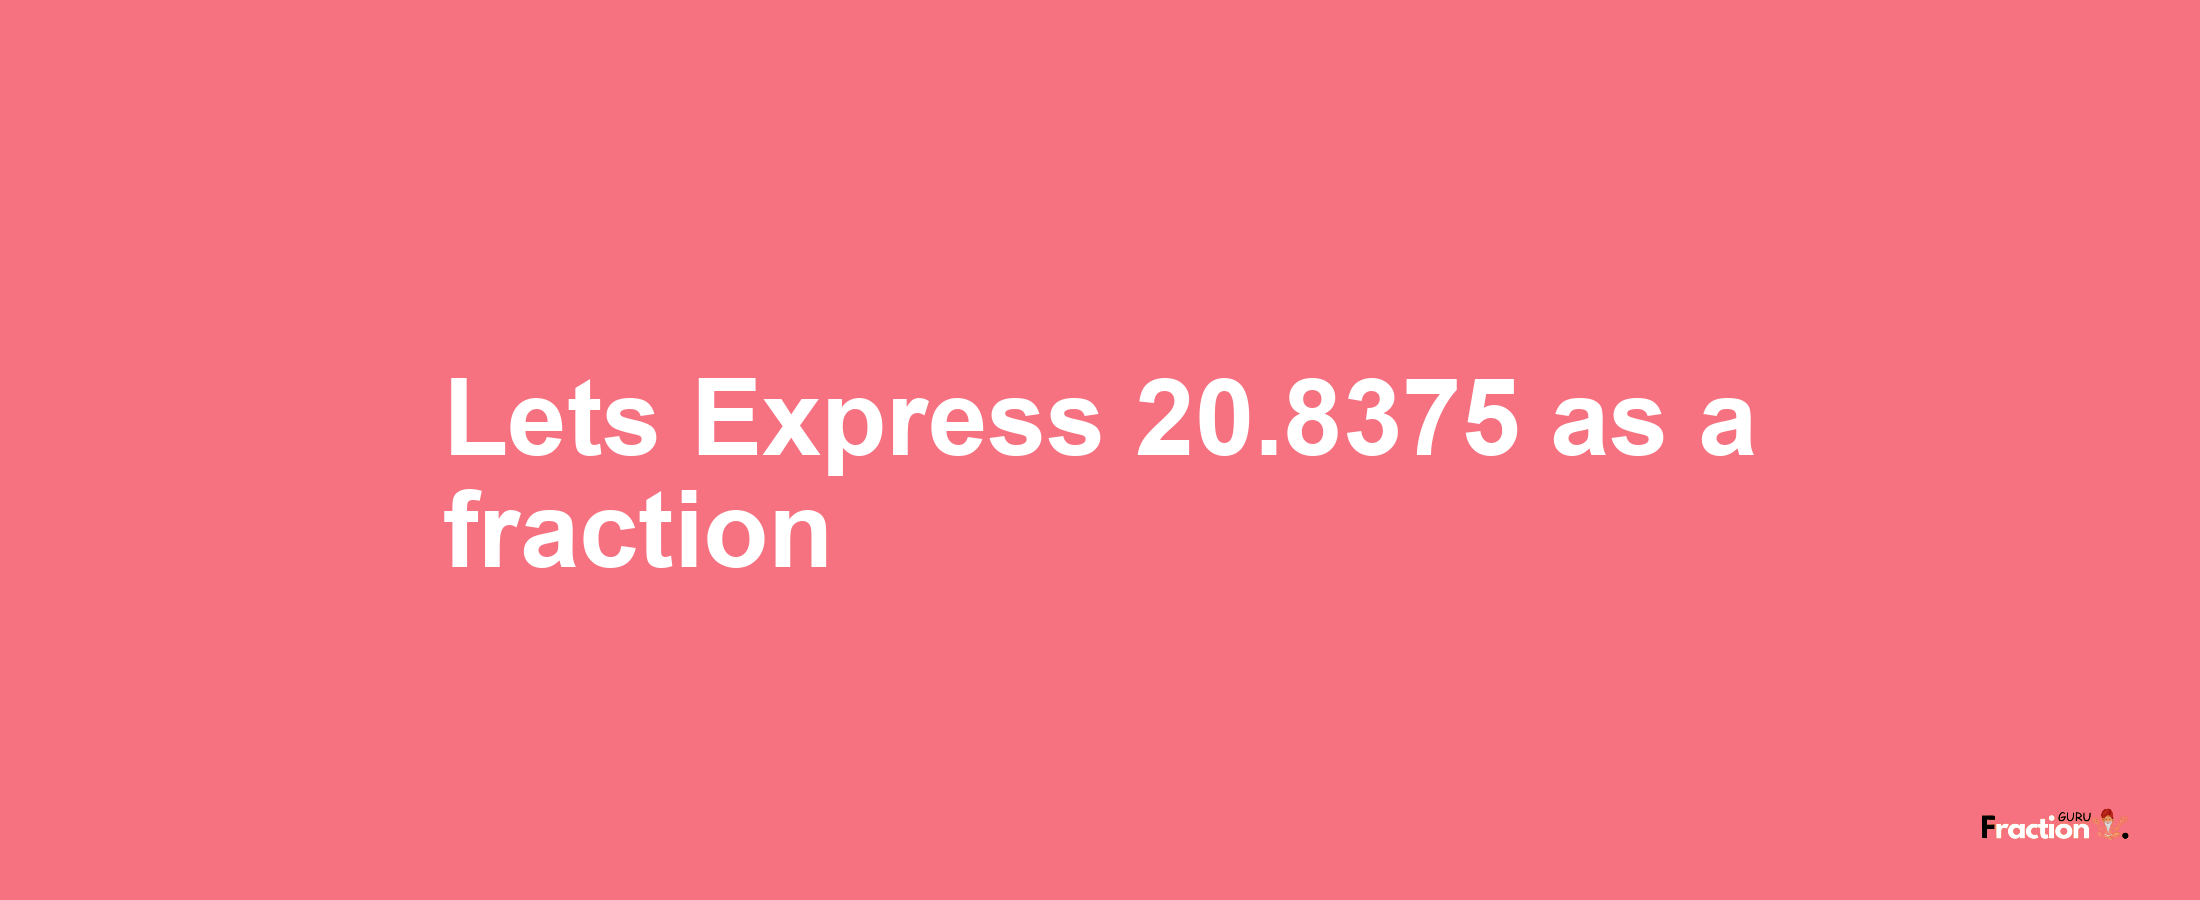 Lets Express 20.8375 as afraction